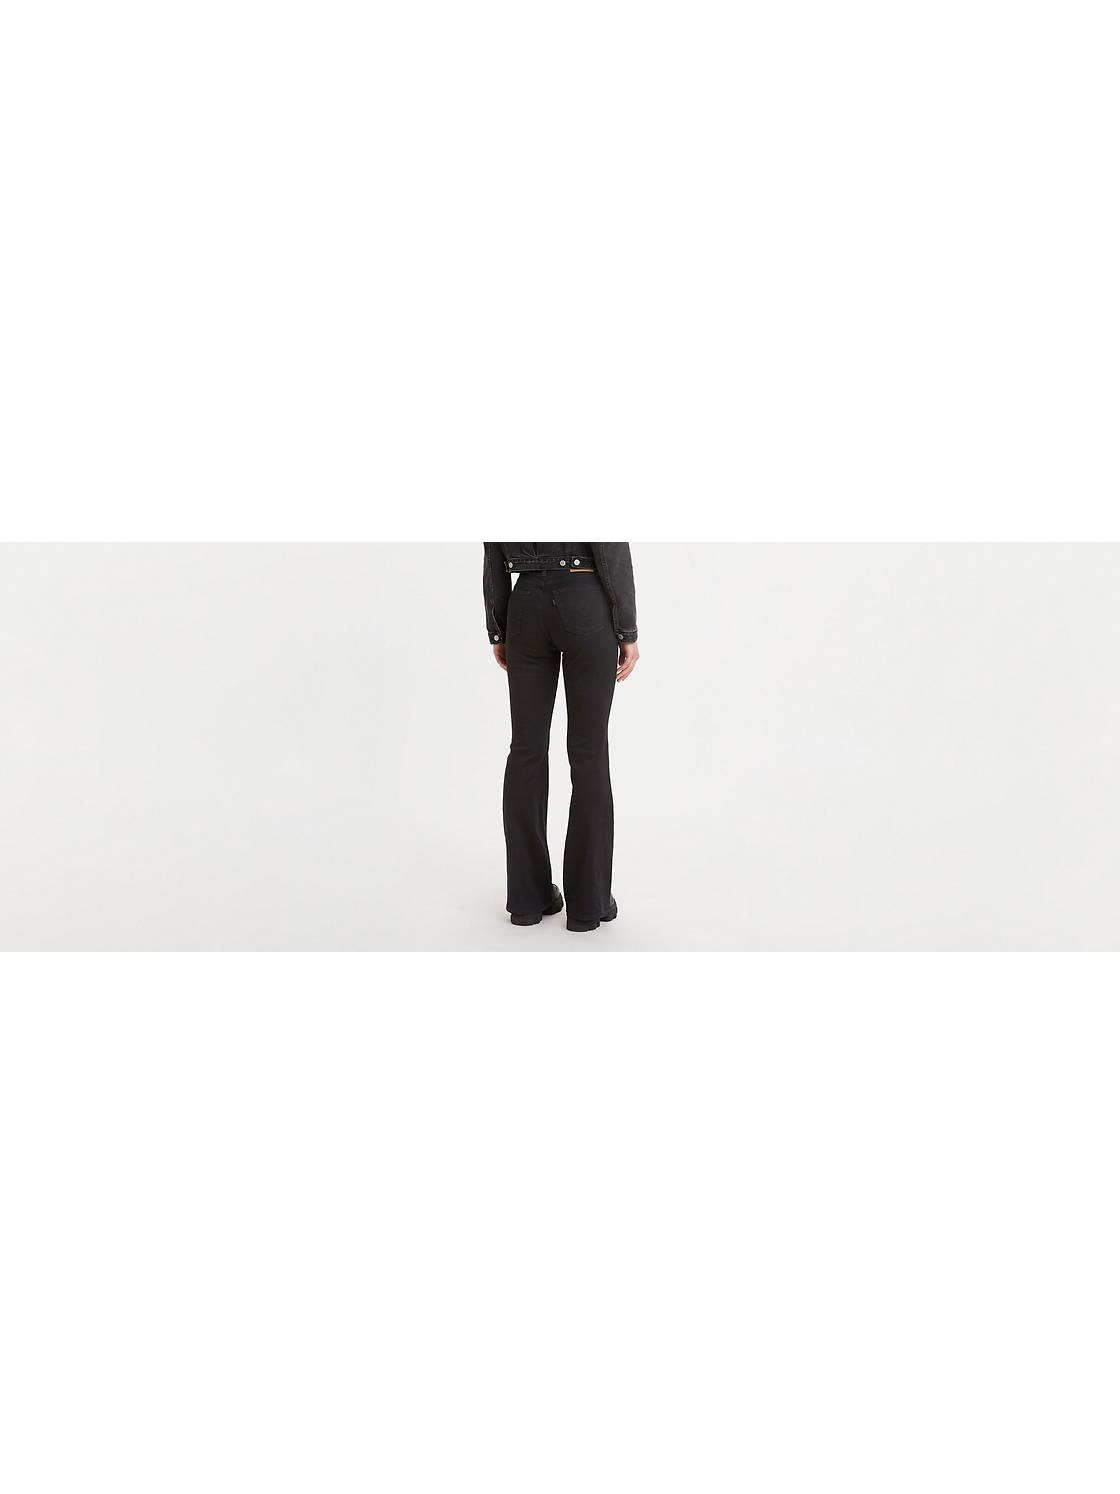 Women's Bootcut and Flare Jeans, Black/Dark grey